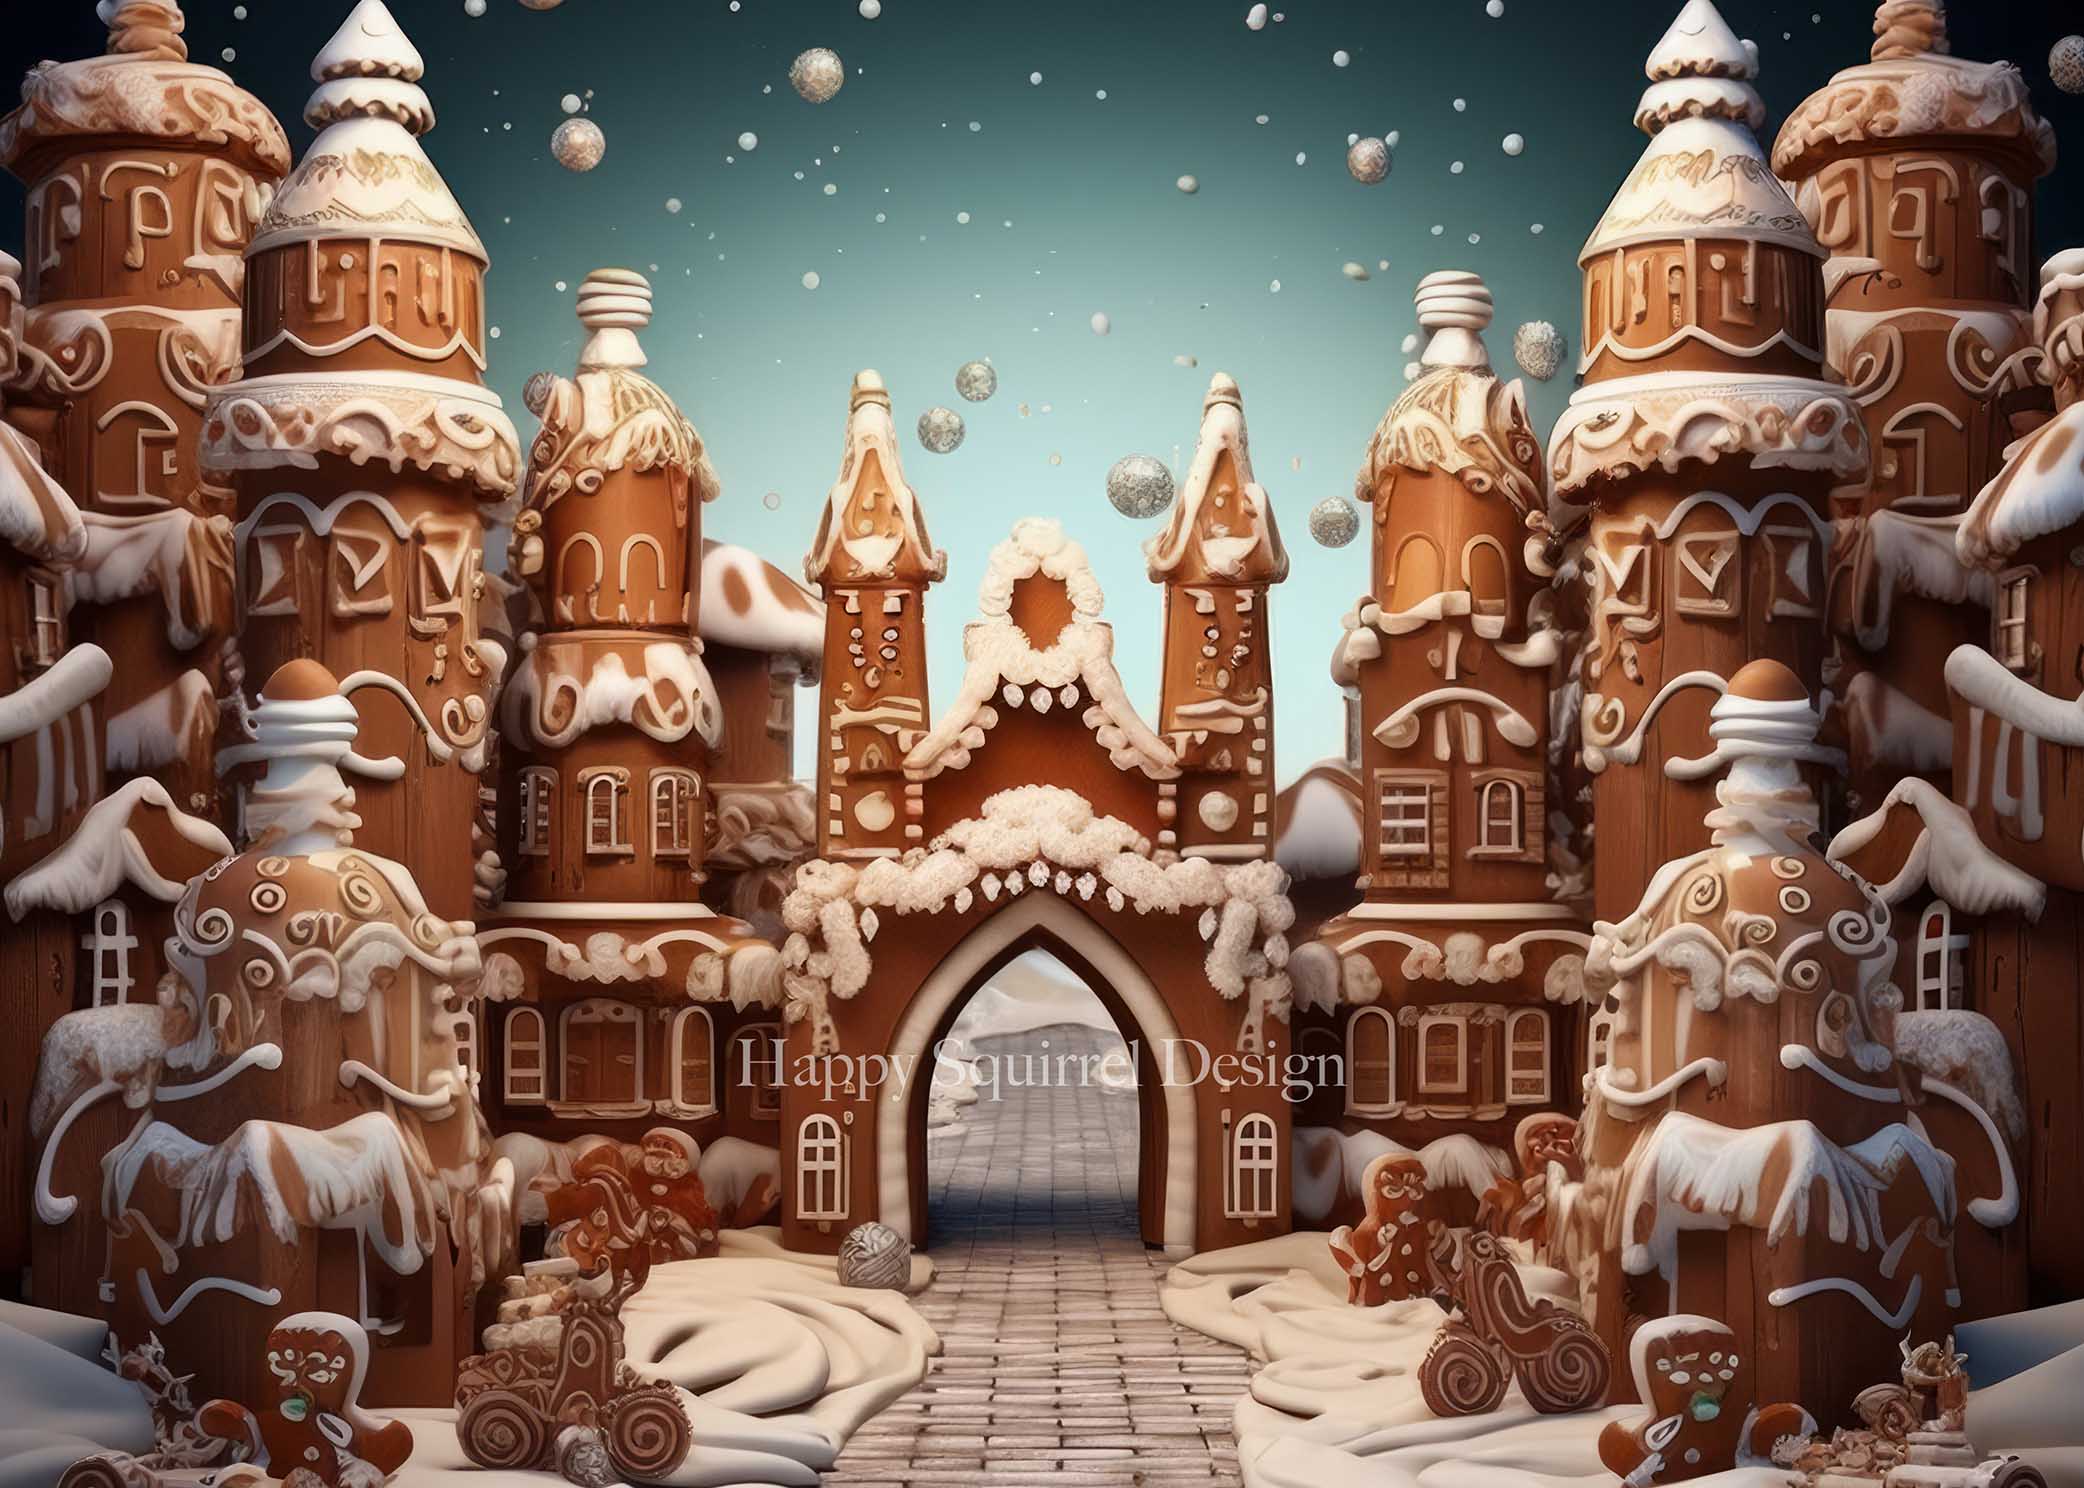 Kate Gingerbread Castle Designed by Happy Squirrel Design